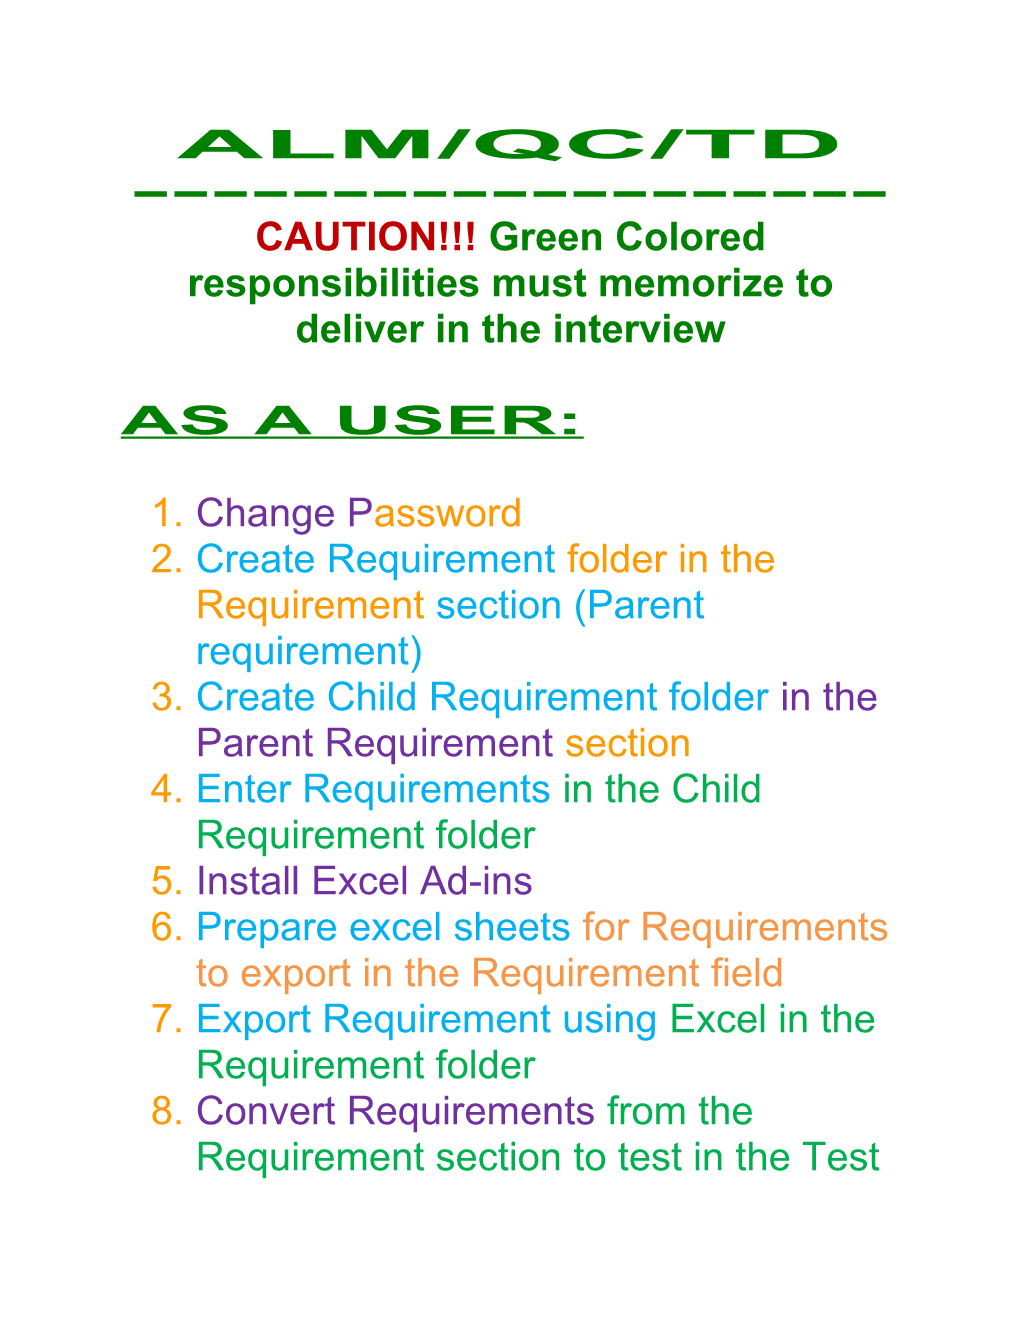 CAUTION Green Colored Responsibilities Must Memorize to Deliver in the Interview